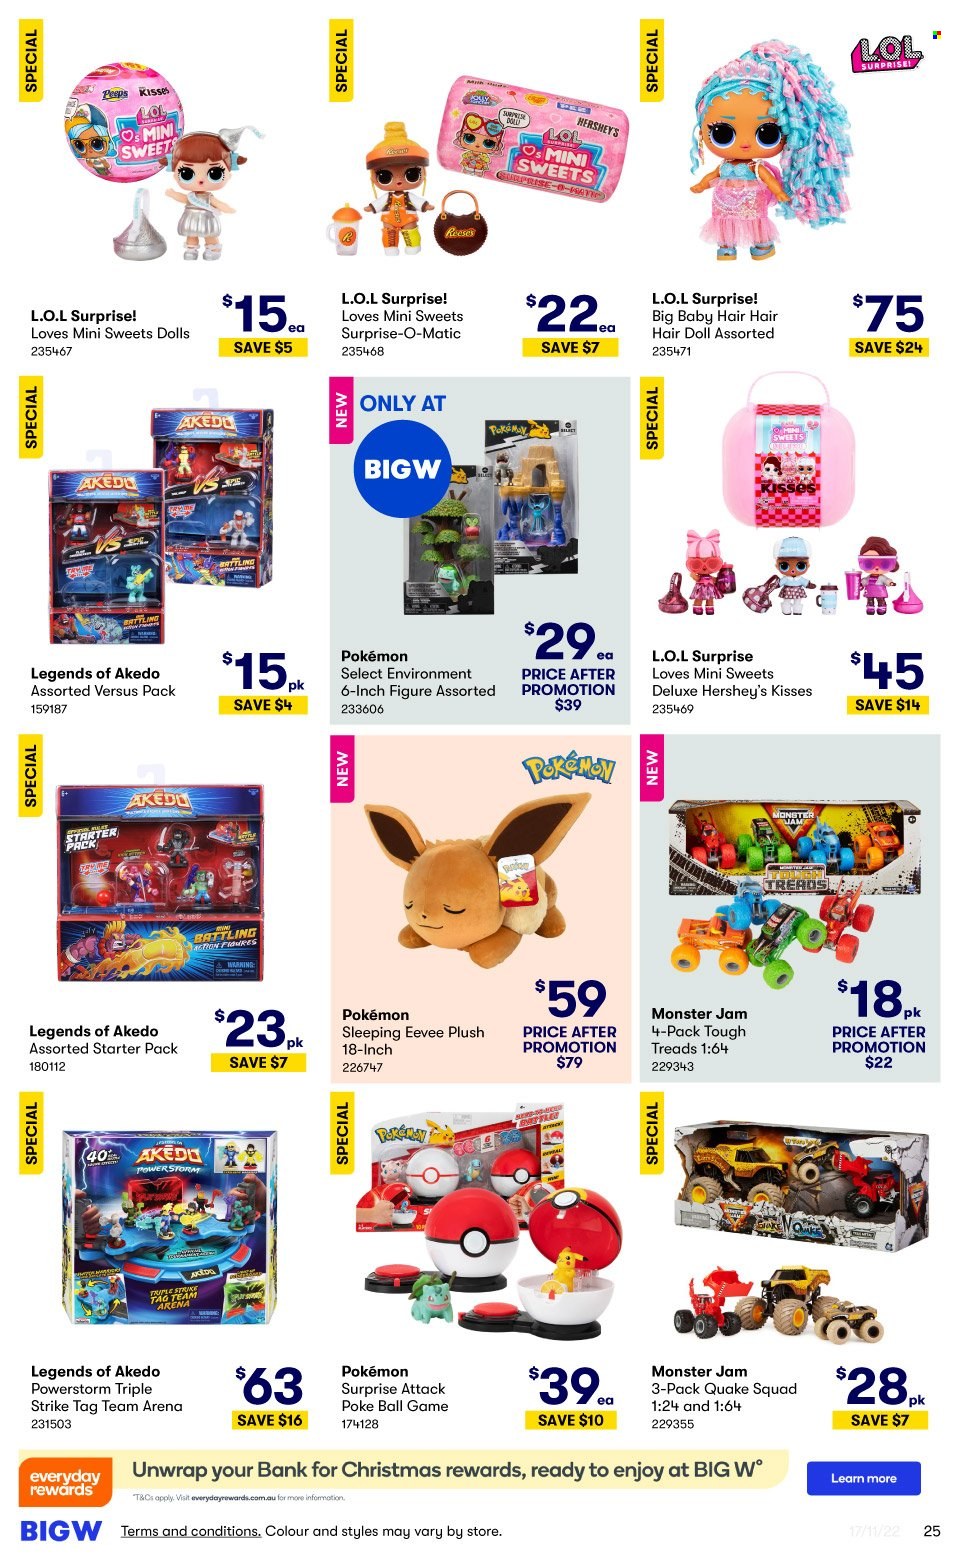 thumbnail - BIG W Catalogue - Sales products - Reese's, Hershey's, Peeps, Monster, Pokémon, doll, poke ball, L.O.L. Surprise. Page 25.